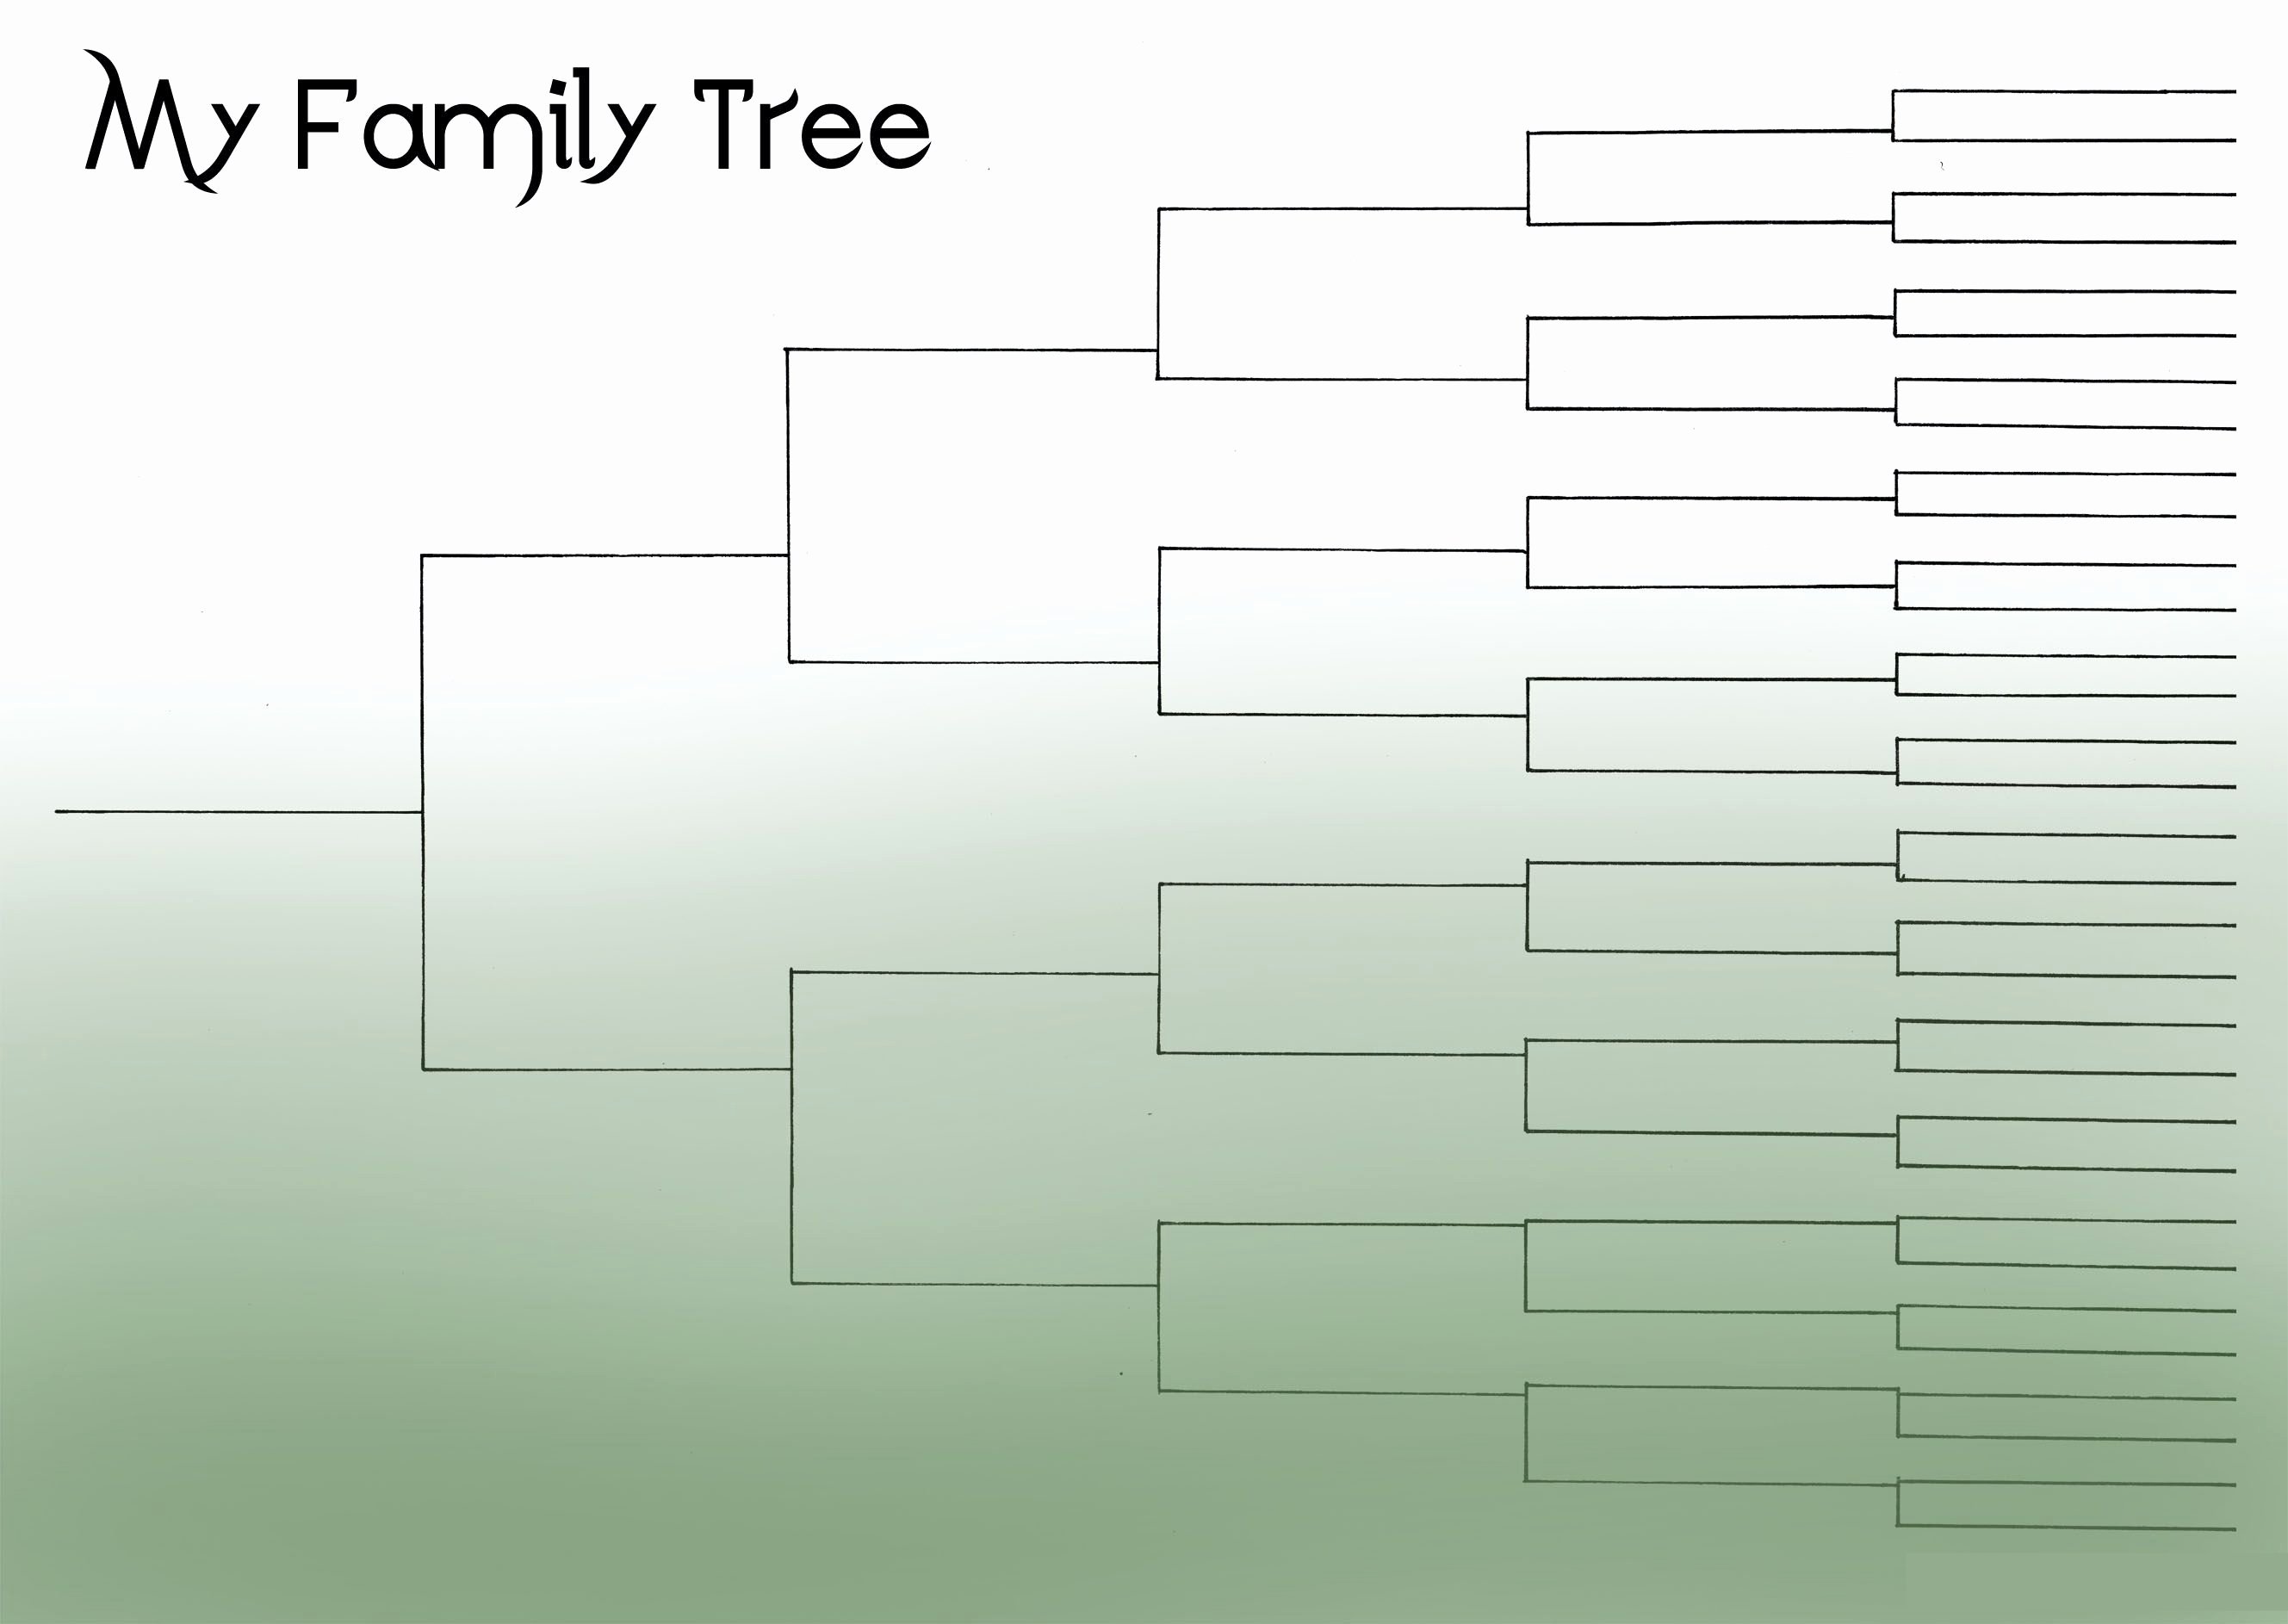 Family Tree with Pictures Template Inspirational Free Editable Family Tree Template Daily Roabox